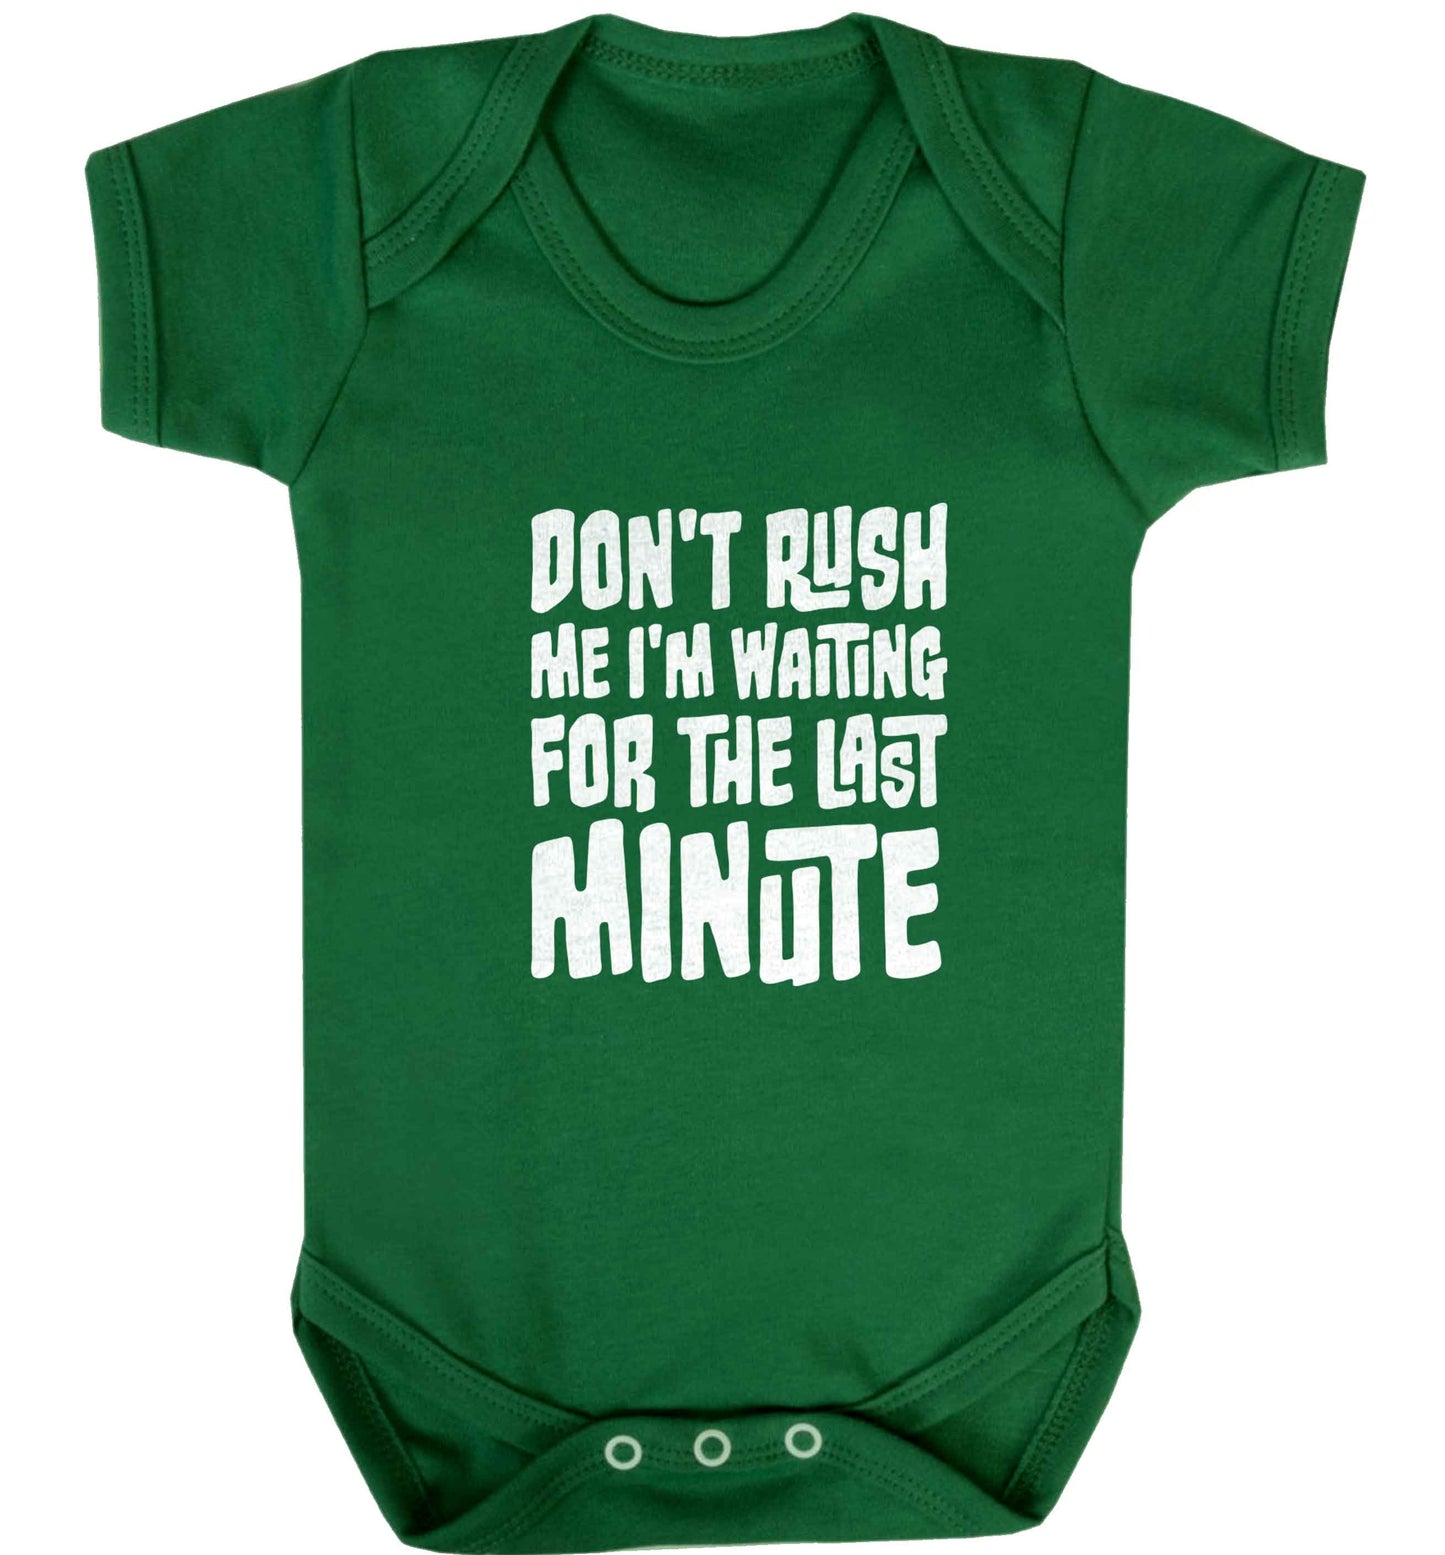 Don't rush me I'm waiting for the last minute baby vest green 18-24 months